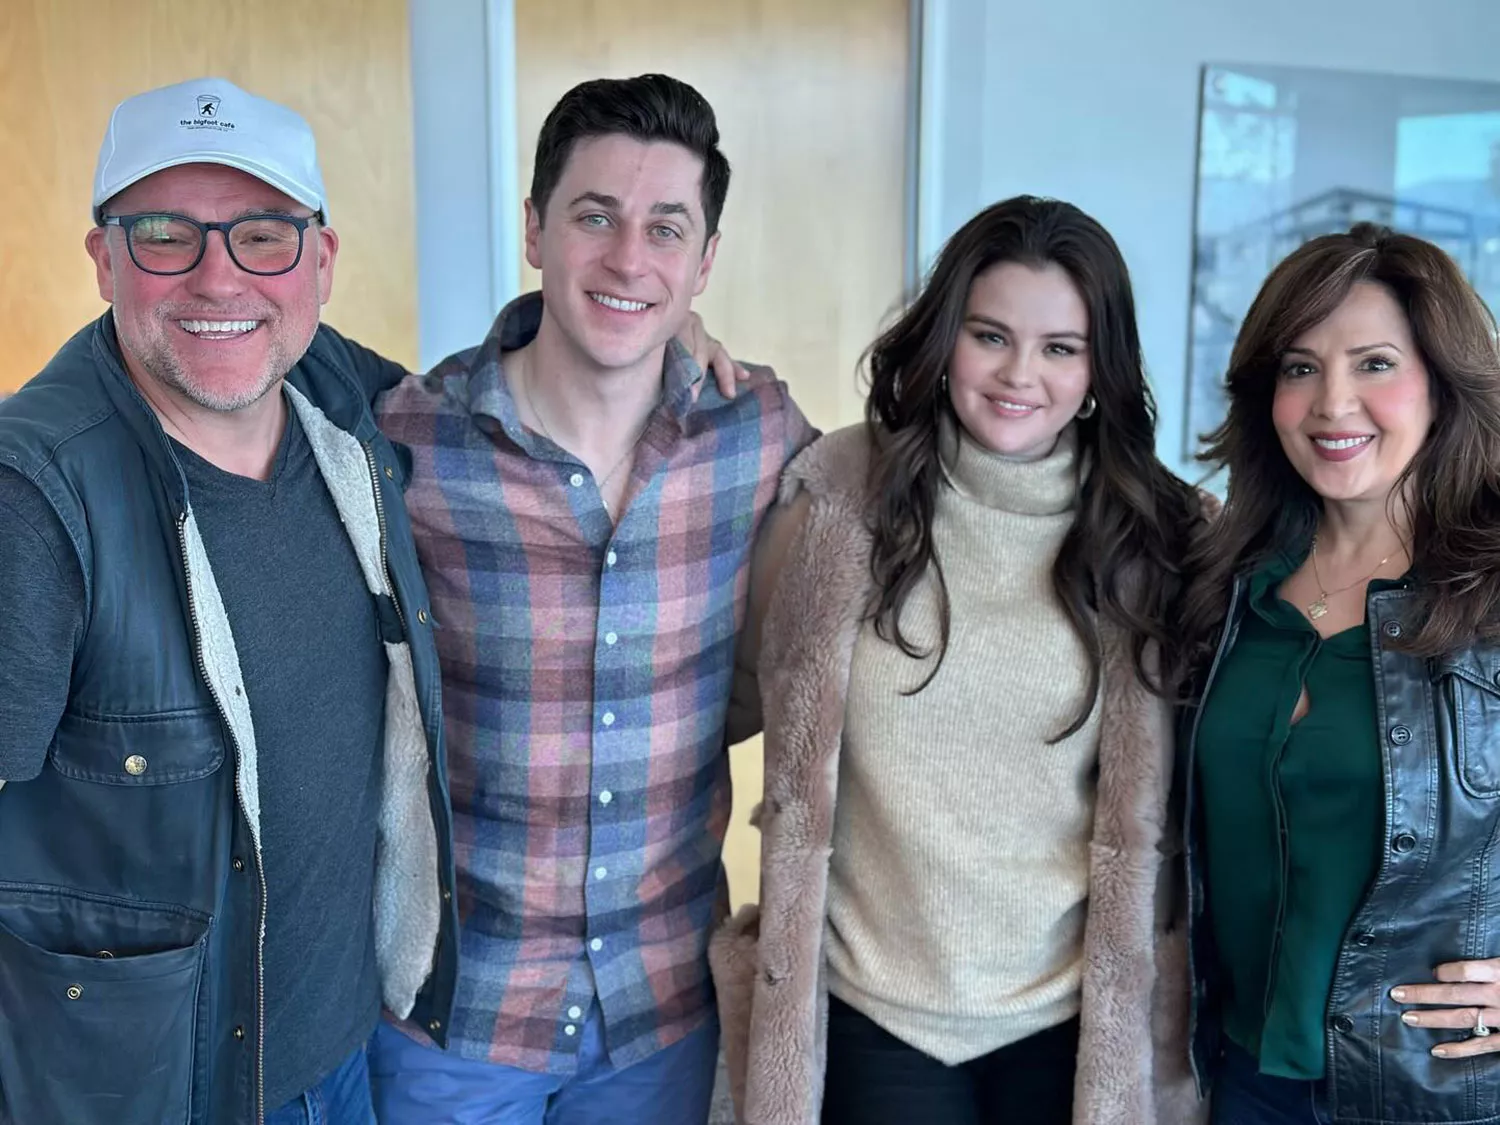 Selena Gomez Appears in New Photo with âWizards of Waverly Placeâ Costars https://www.instagram.com/p/C2lJNheP_xE/?hl=en